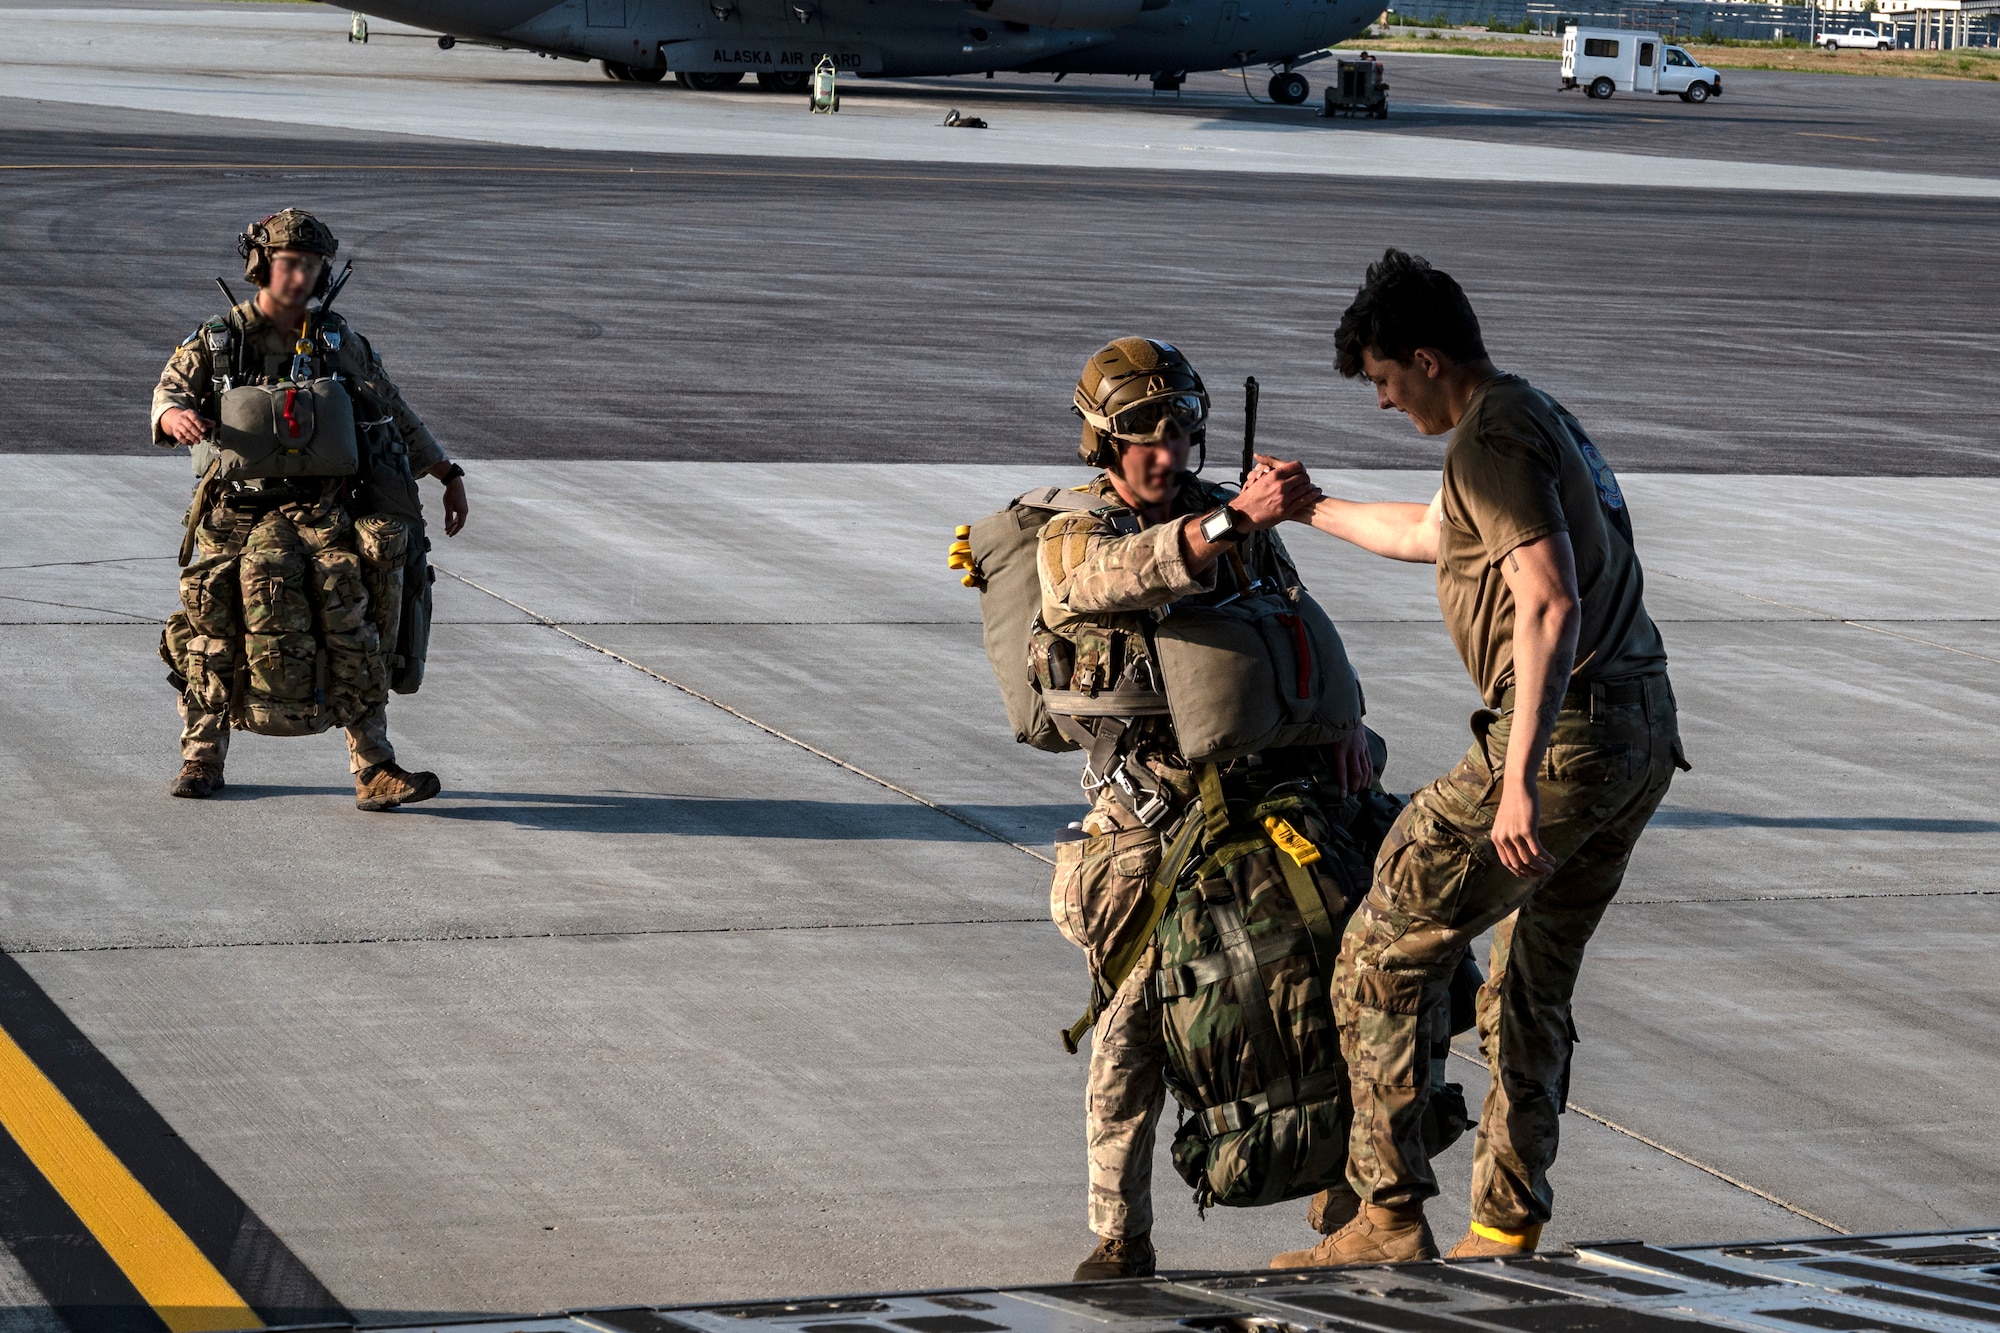 Paratrooper and Special Operations Unit jump